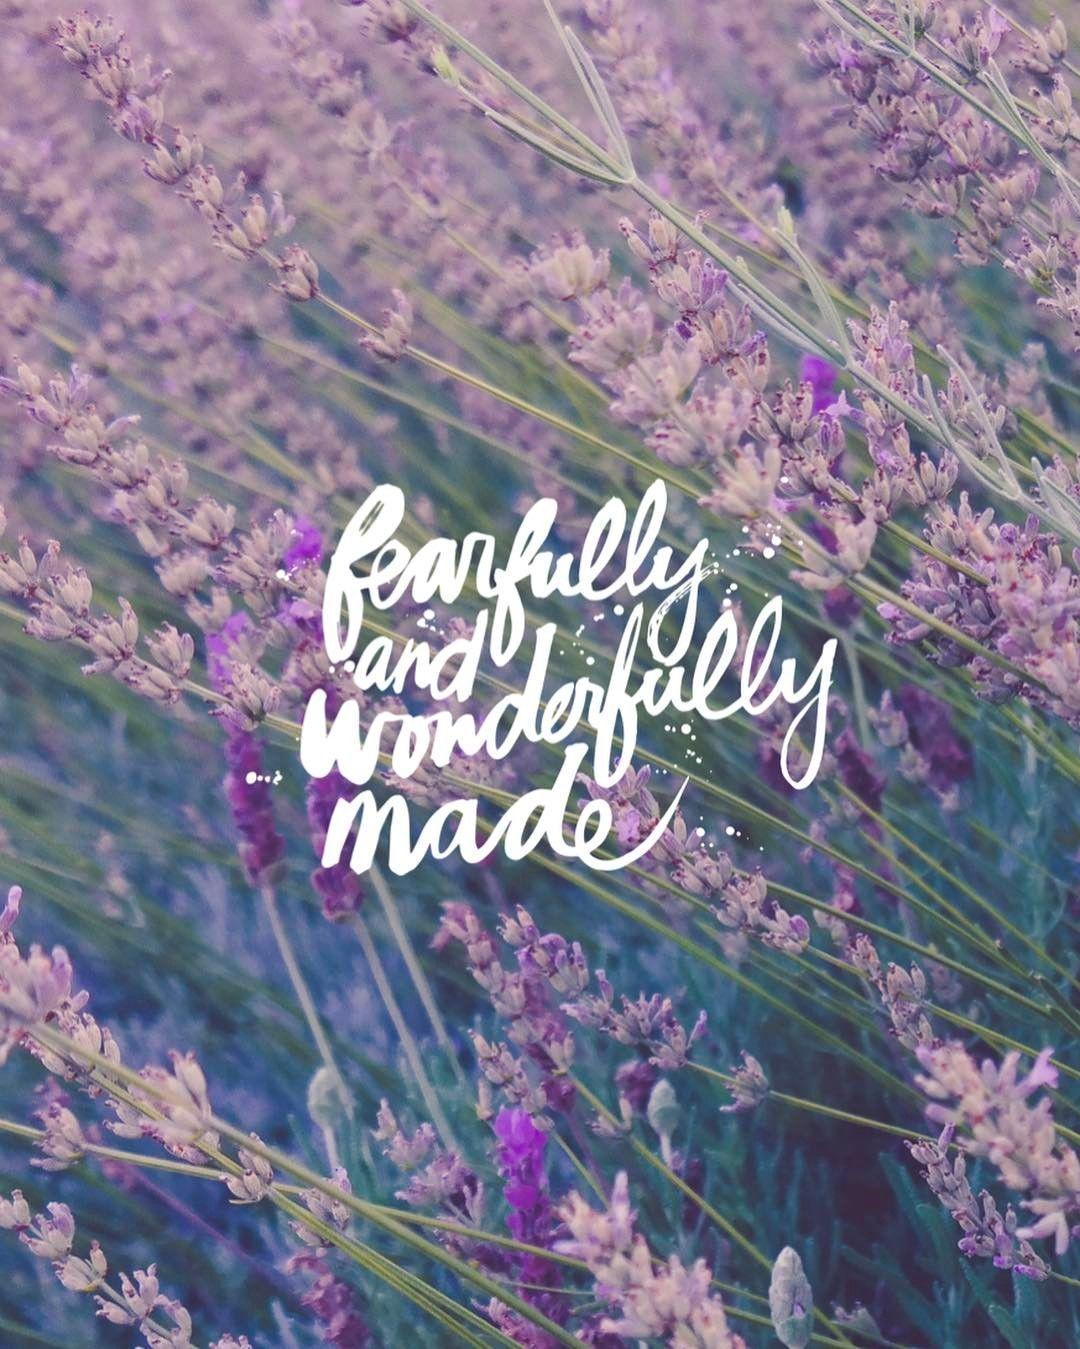 I praise you for I am fearfully and wonderfully made. Wonderful are